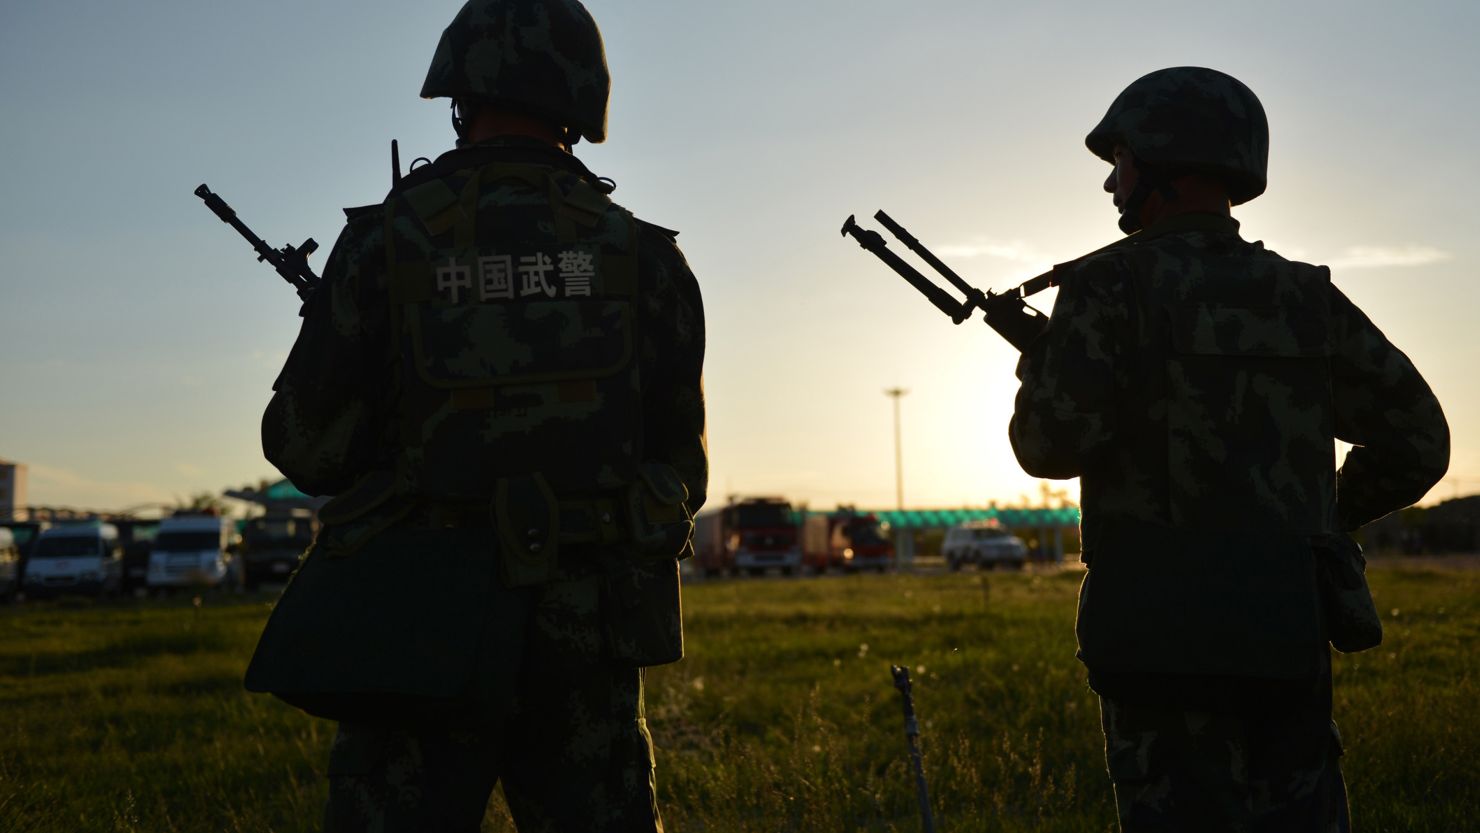 Anti-terrorism forces stand watch in this file image taken in northwest China's Xinjiang region.